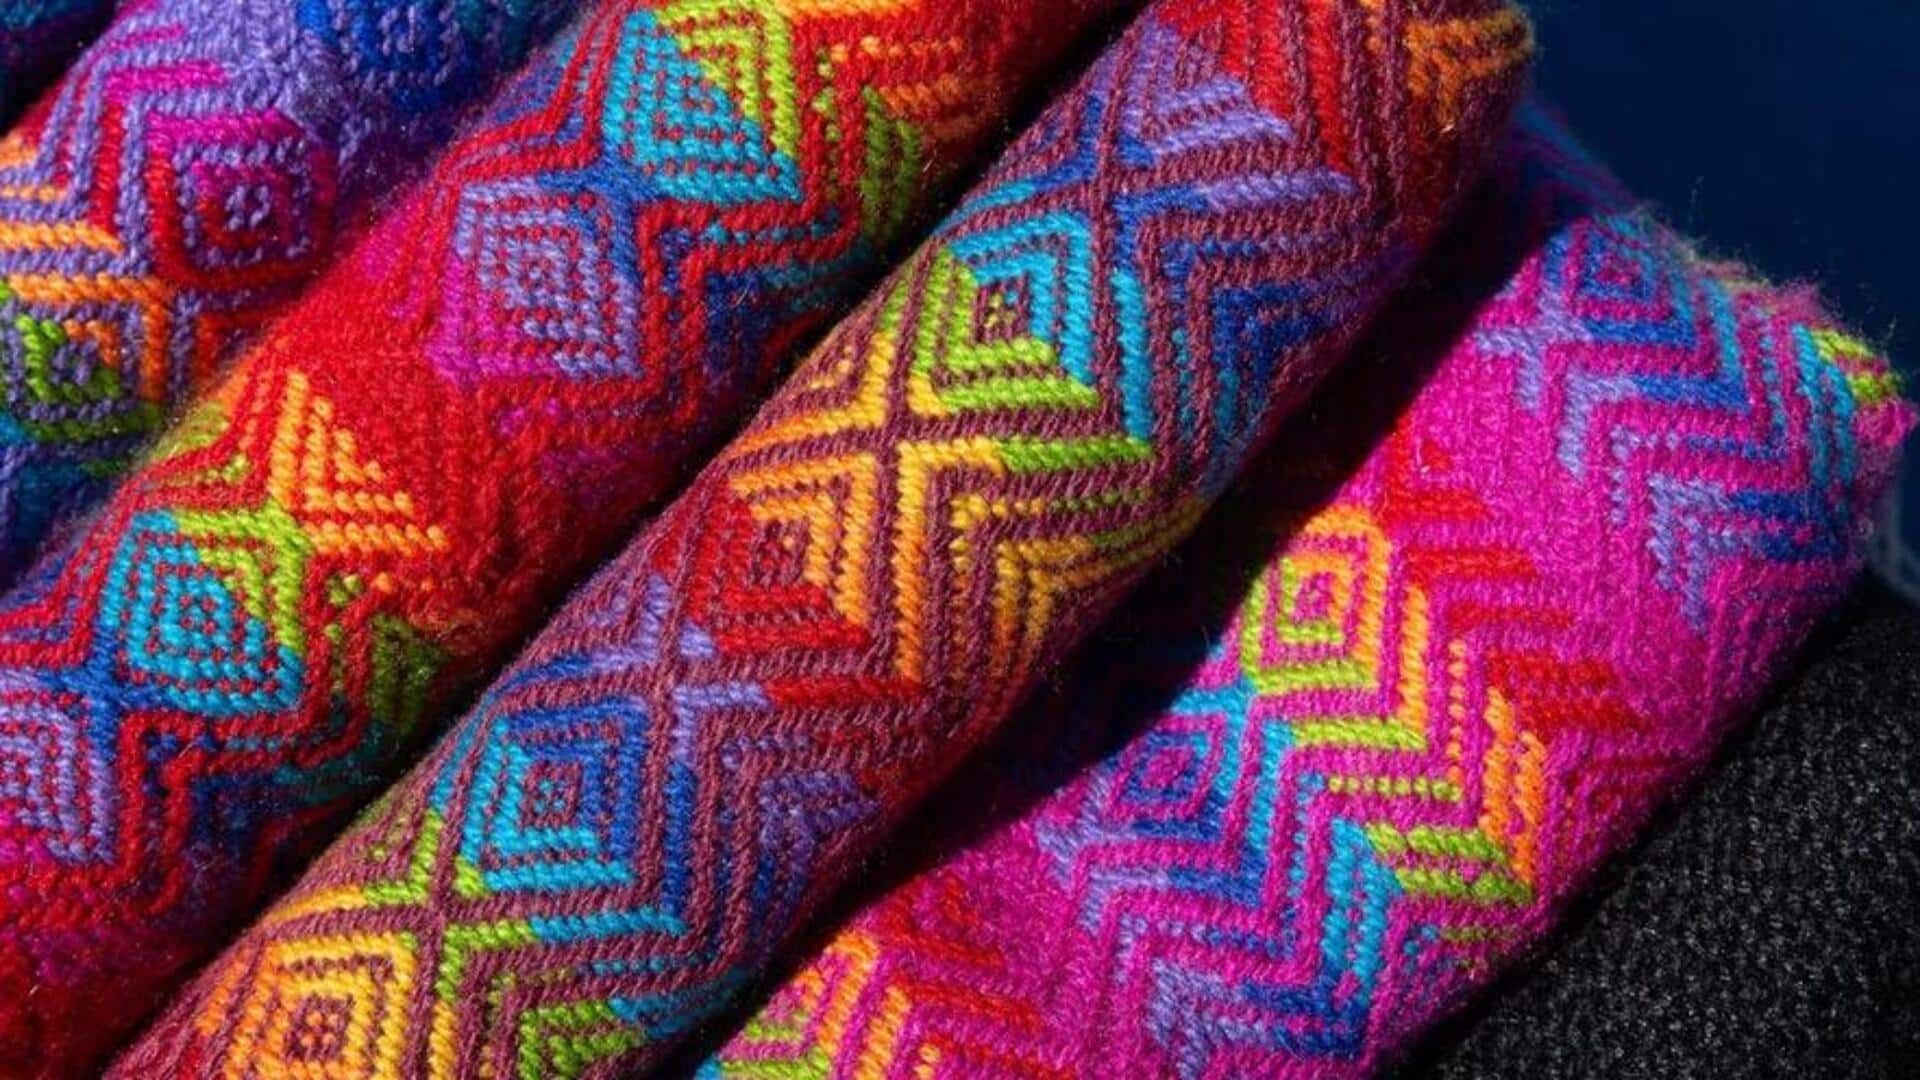 Mayan textiles: Incorporating traditional patterns into modern wear